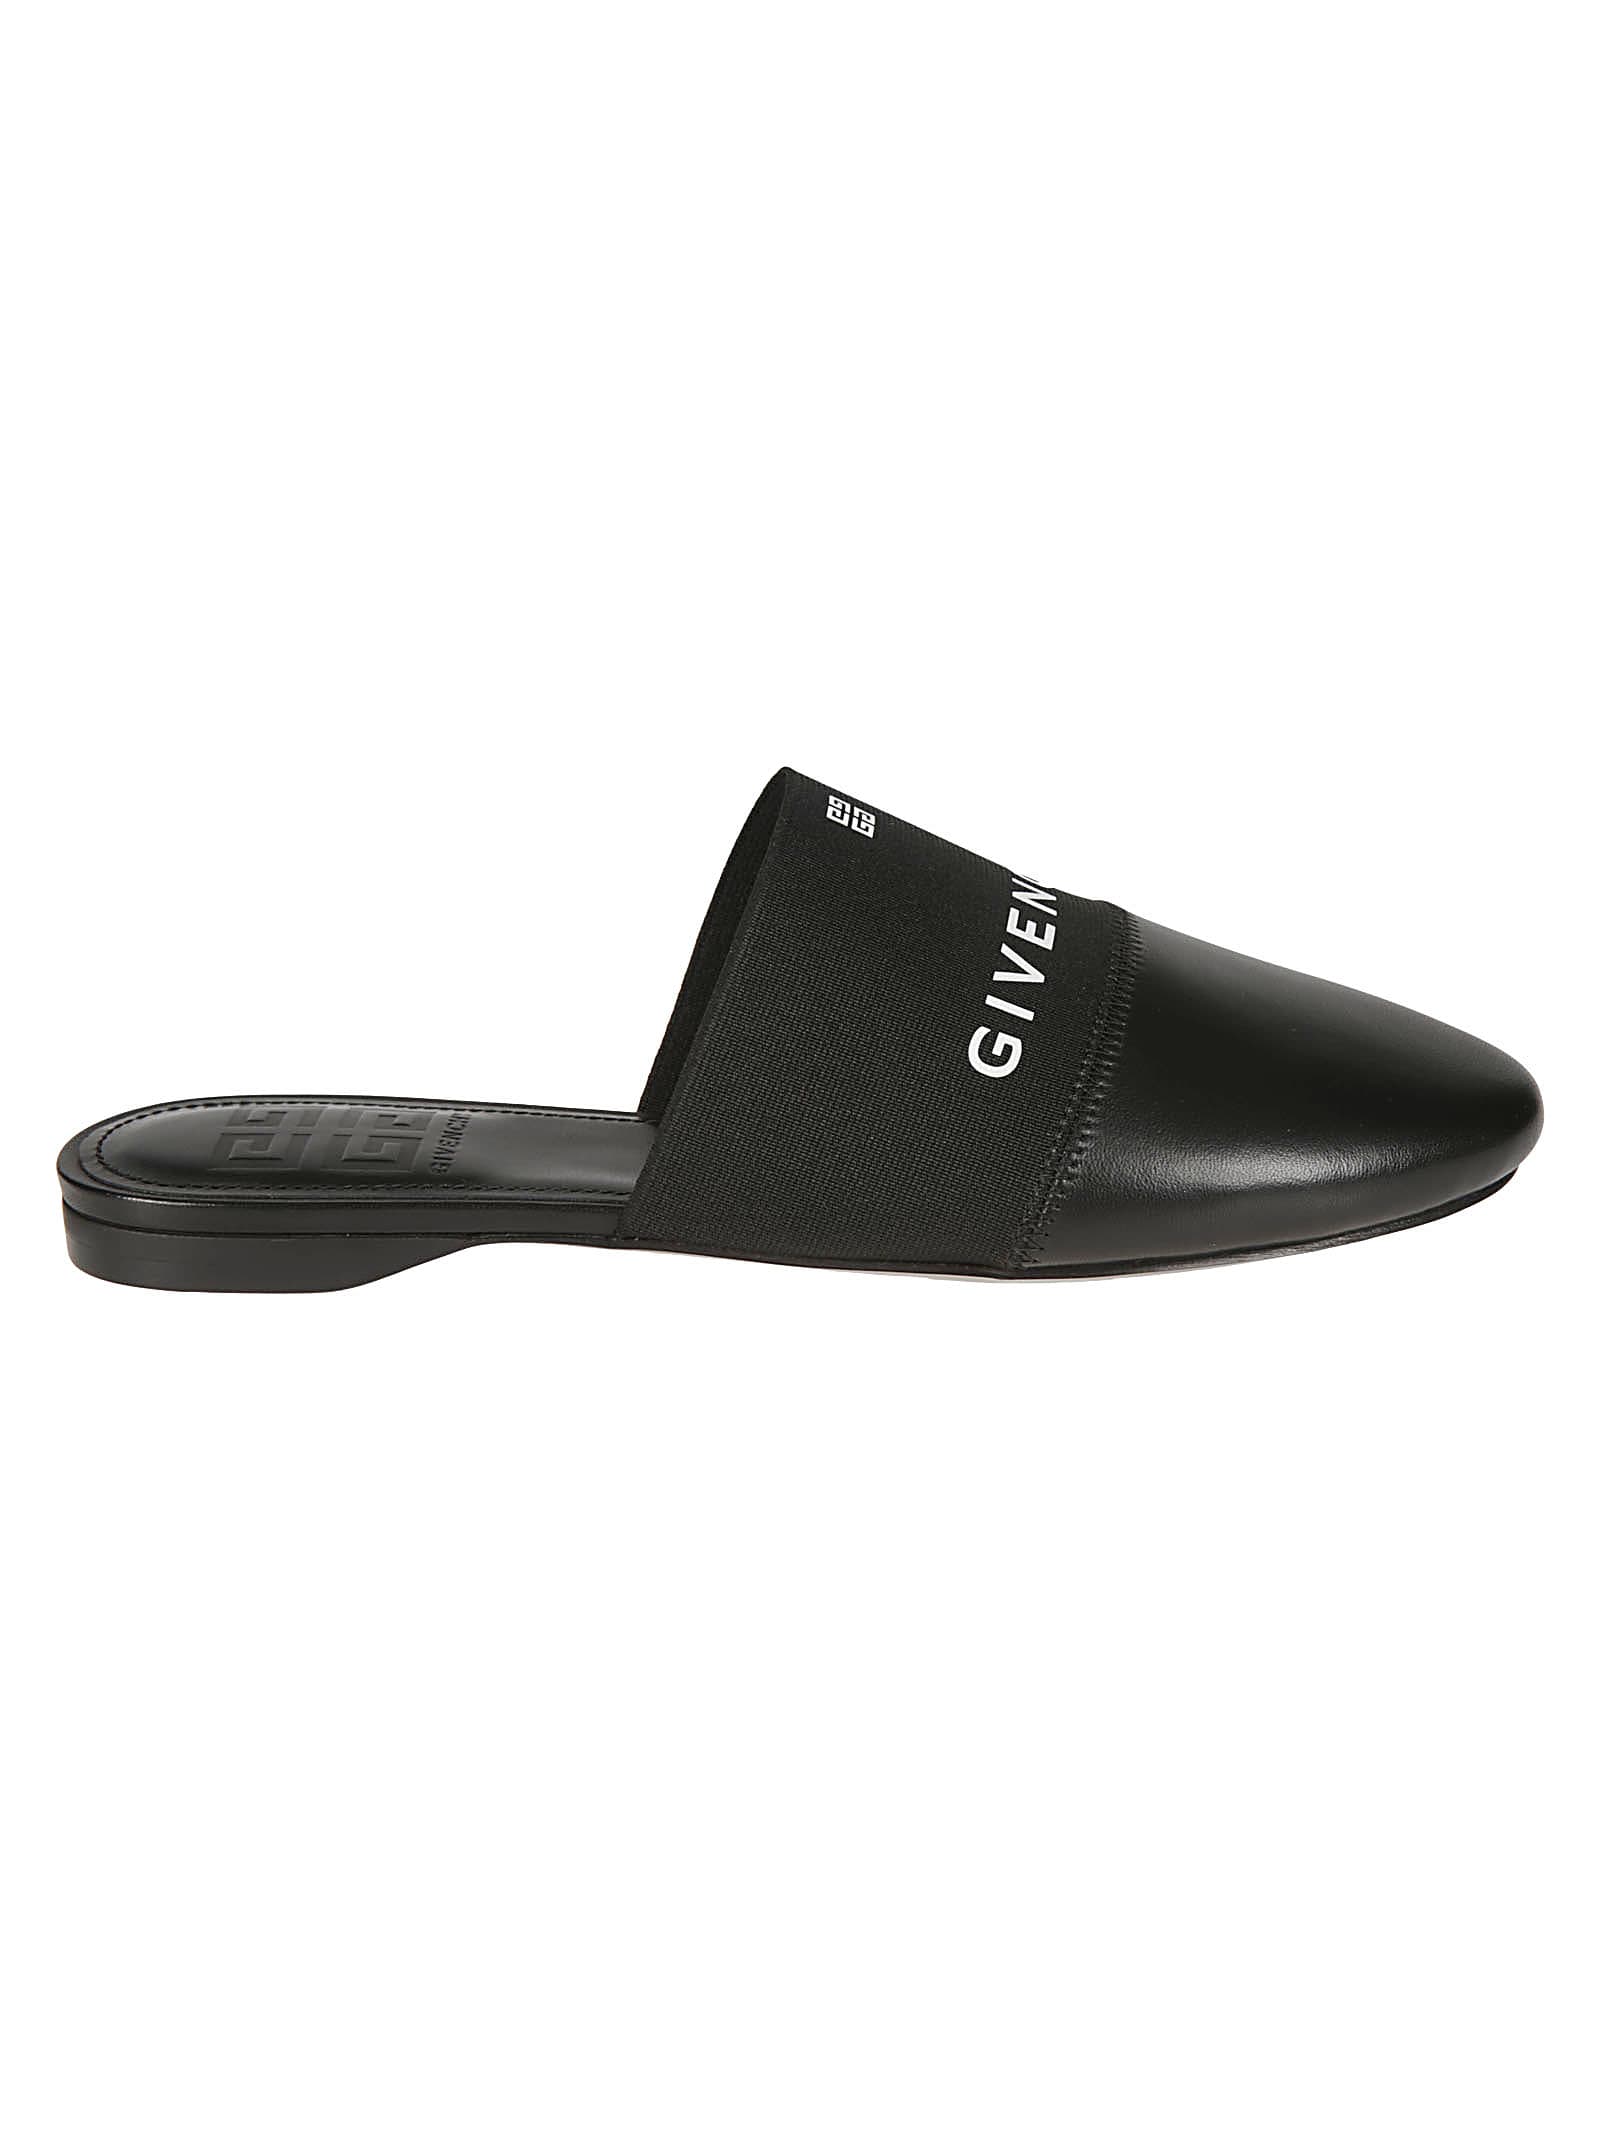 Buy Givenchy Bedford Mules online, shop Givenchy shoes with free shipping